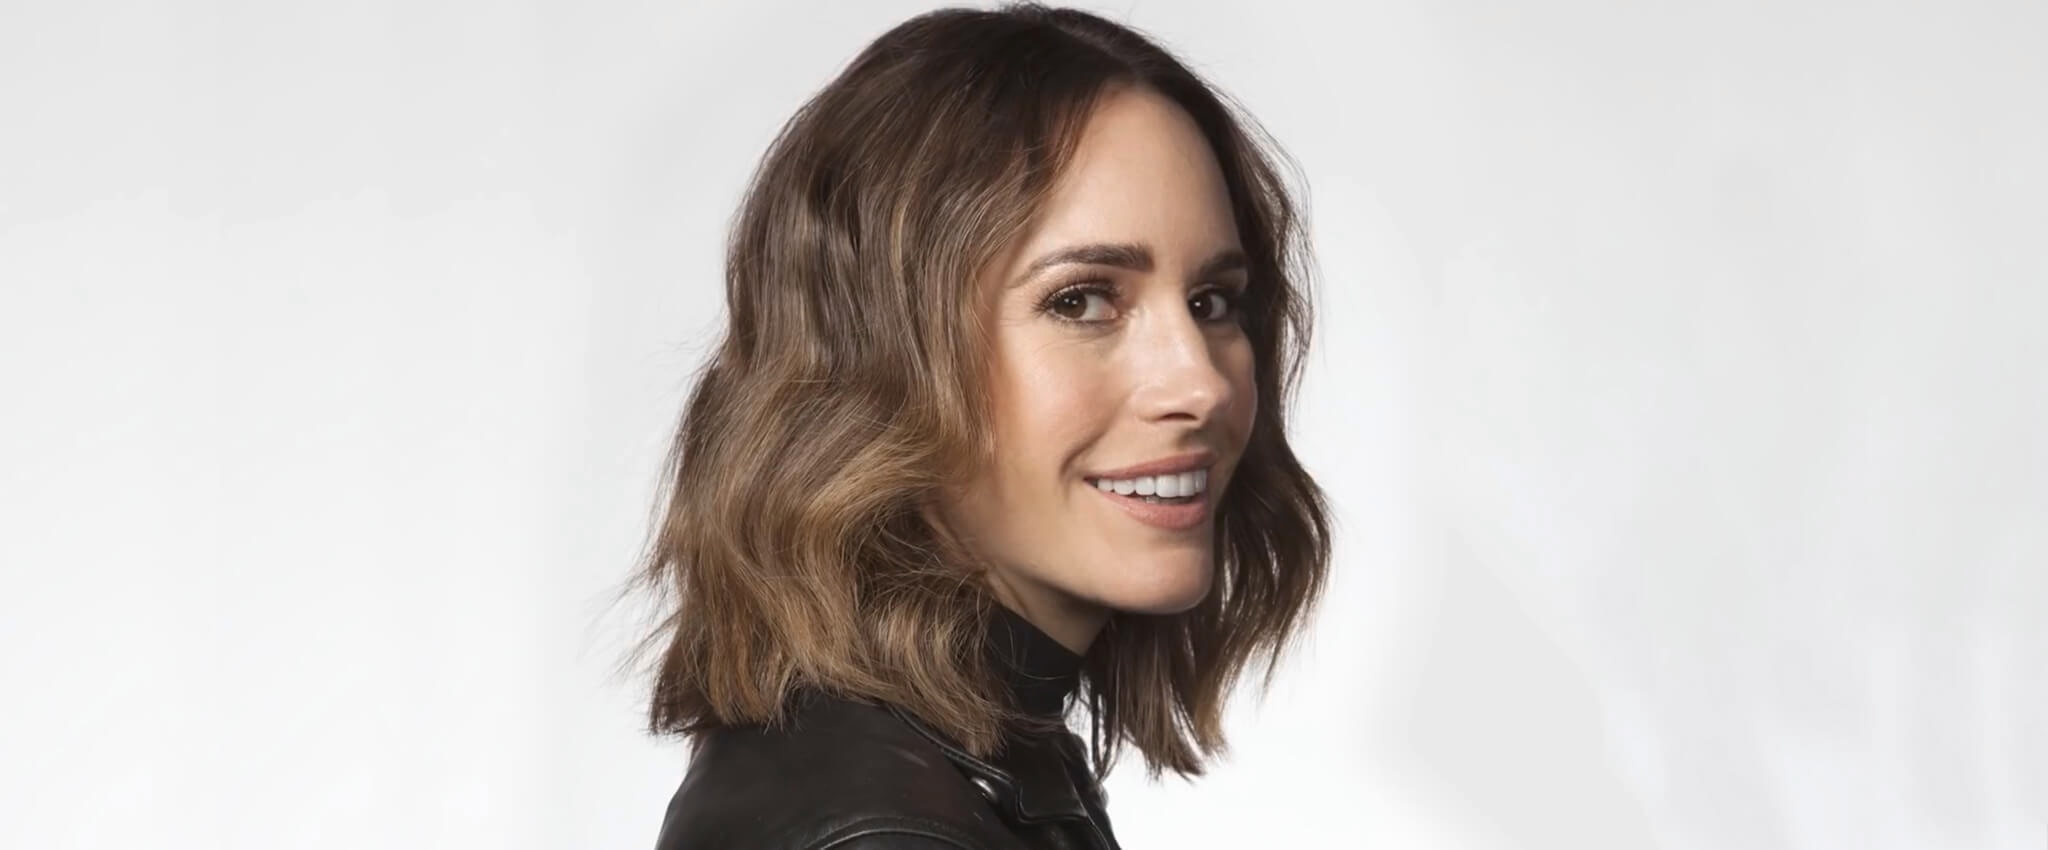 Louise Roe smiling at the camera, wearing a black leather biker jacket